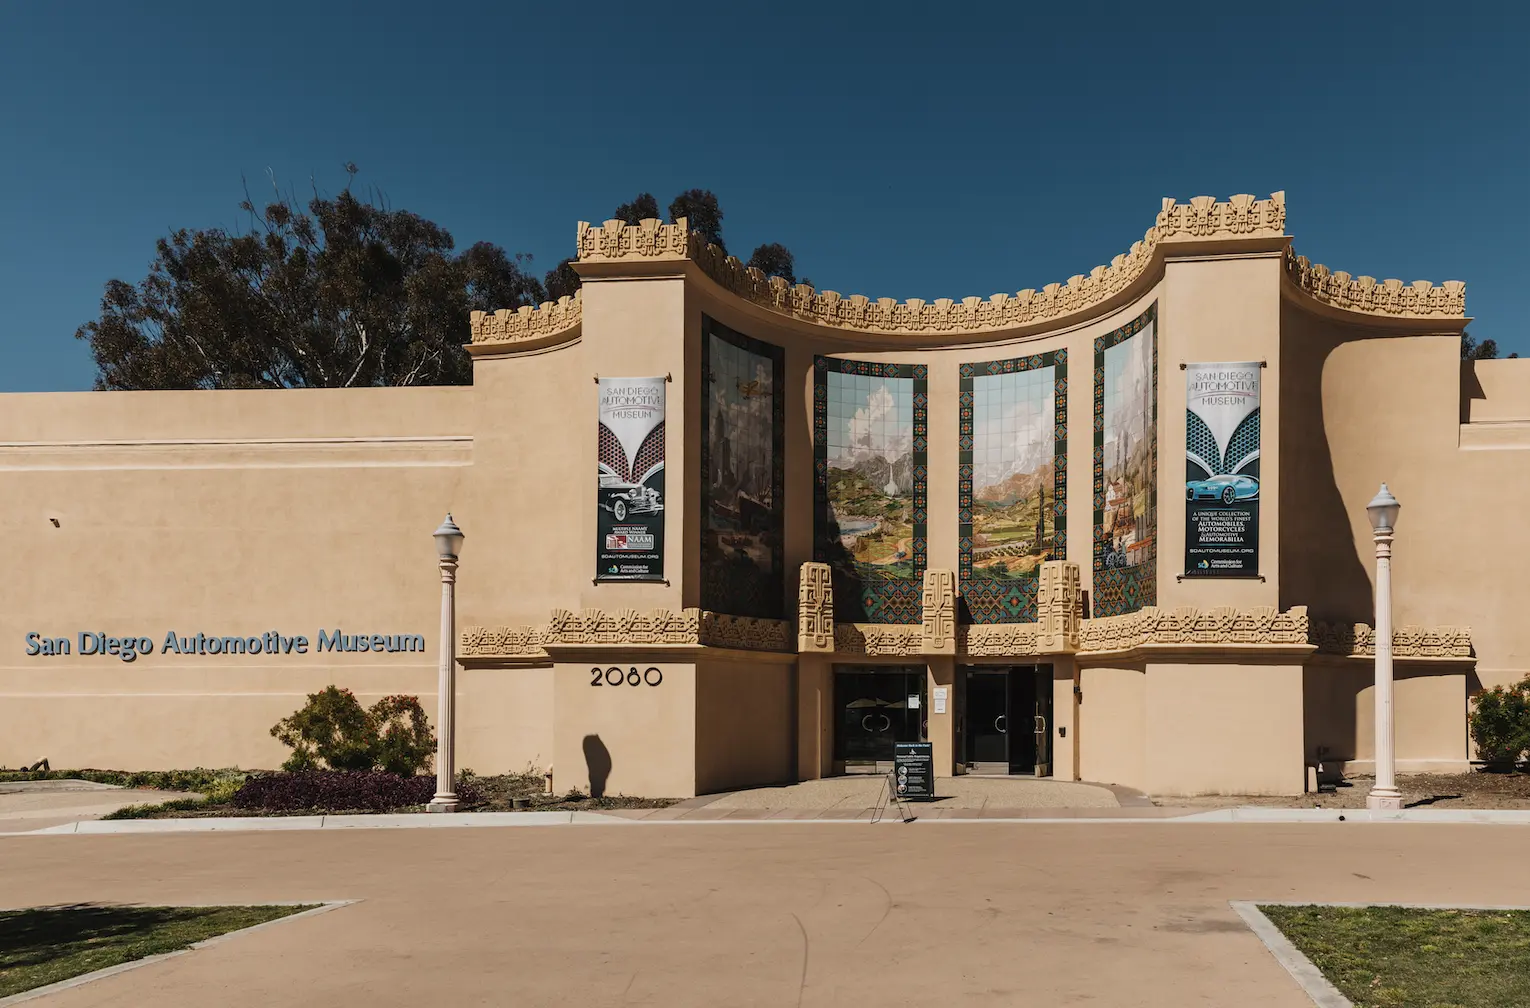 Building and entrance to the San Diego Automotive Museum.